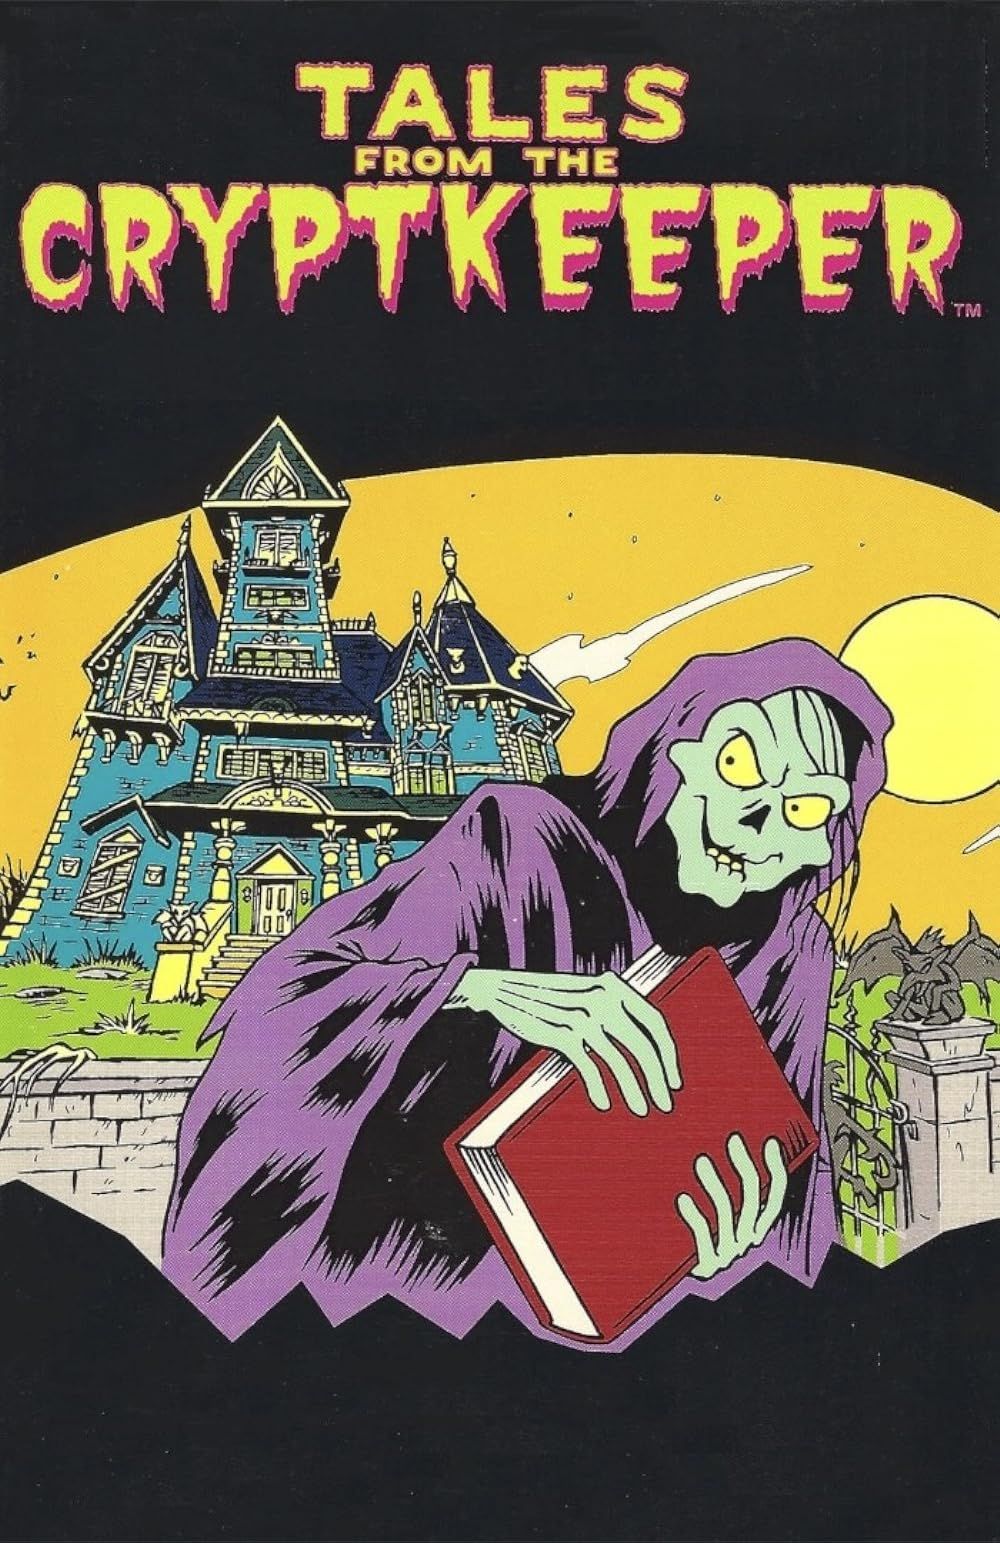 Tales from the Crypt Keeper